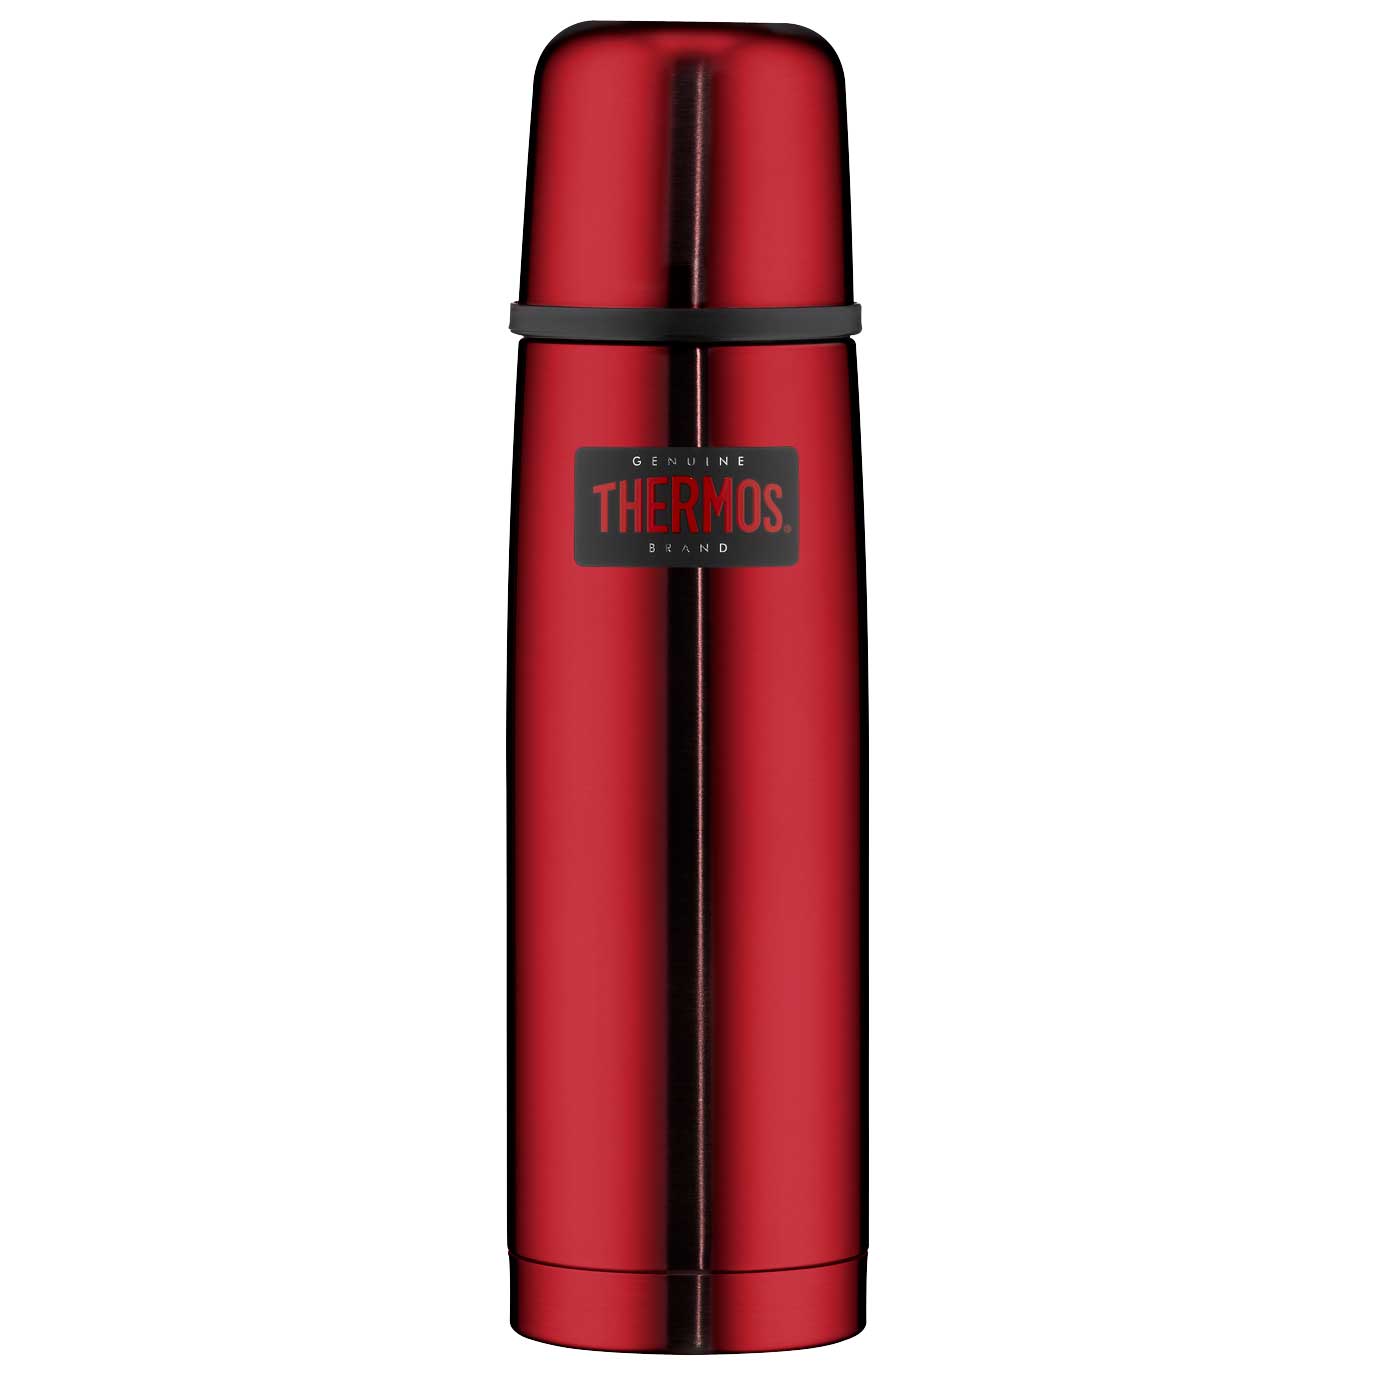 Productfoto van THERMOS® Light &amp; Compact Beverage Bottle 0.5L - cranberry red polished